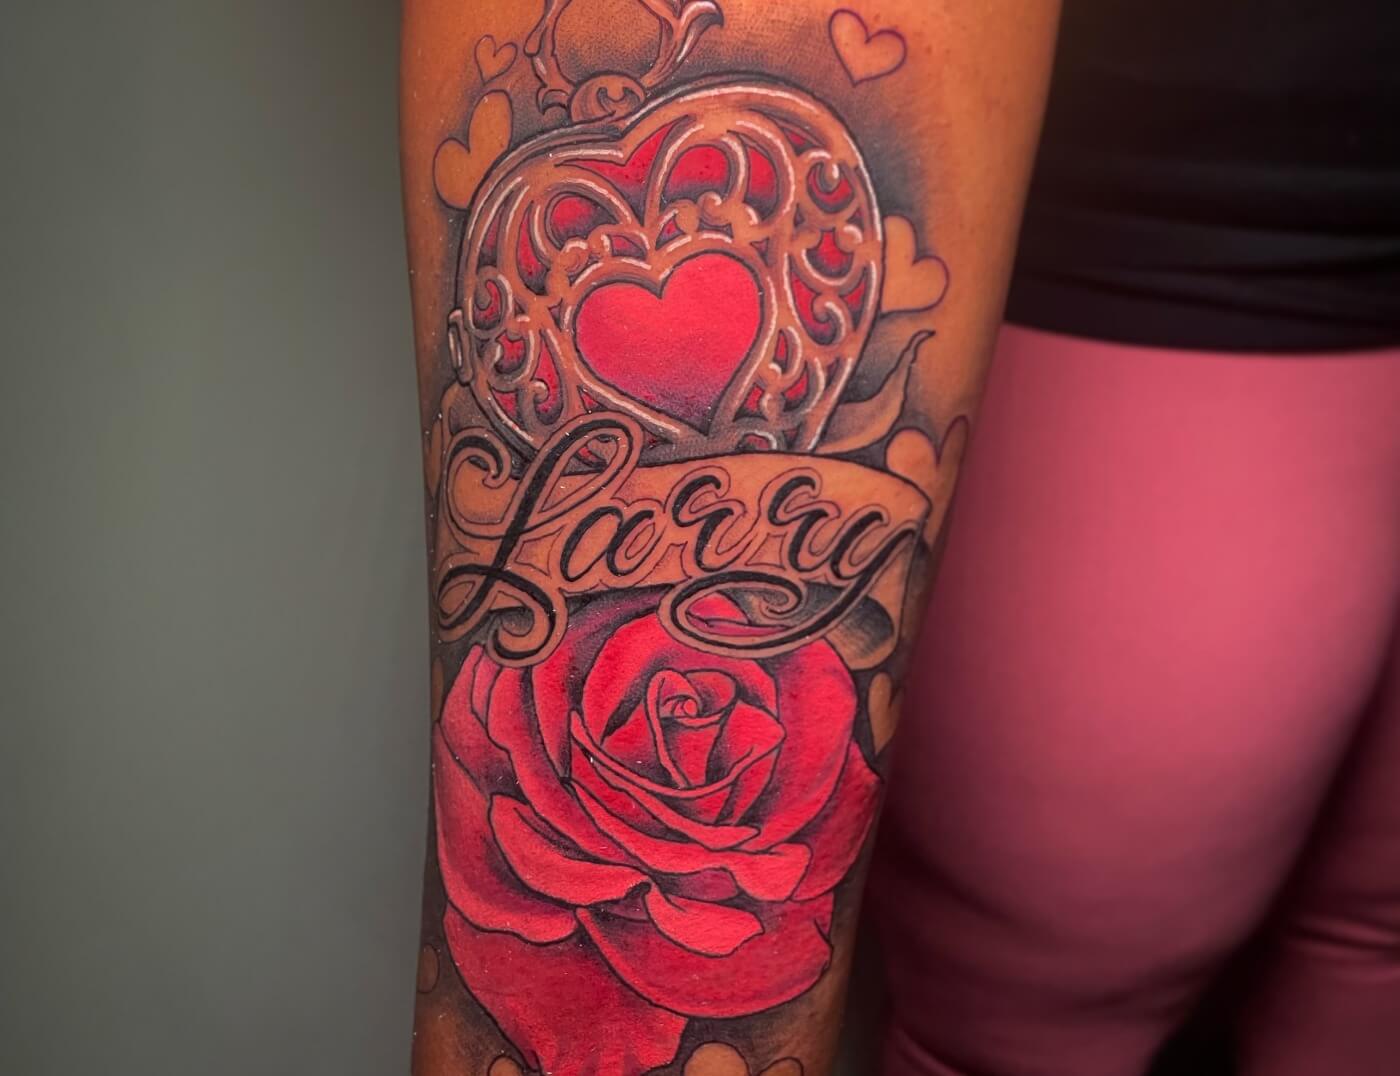 "I Love Larry" Red Rose & Heart Tattoo By Lyric The Artist At Iron Palm Tattoos in downtown Atlanta, GA. This also contains lettering script in a font designed by Lyric. We're open late night most nights until 2AM. Call 404-973-7828 or stop by for a free consultation with Lyric. Walk-Ins are welcome.